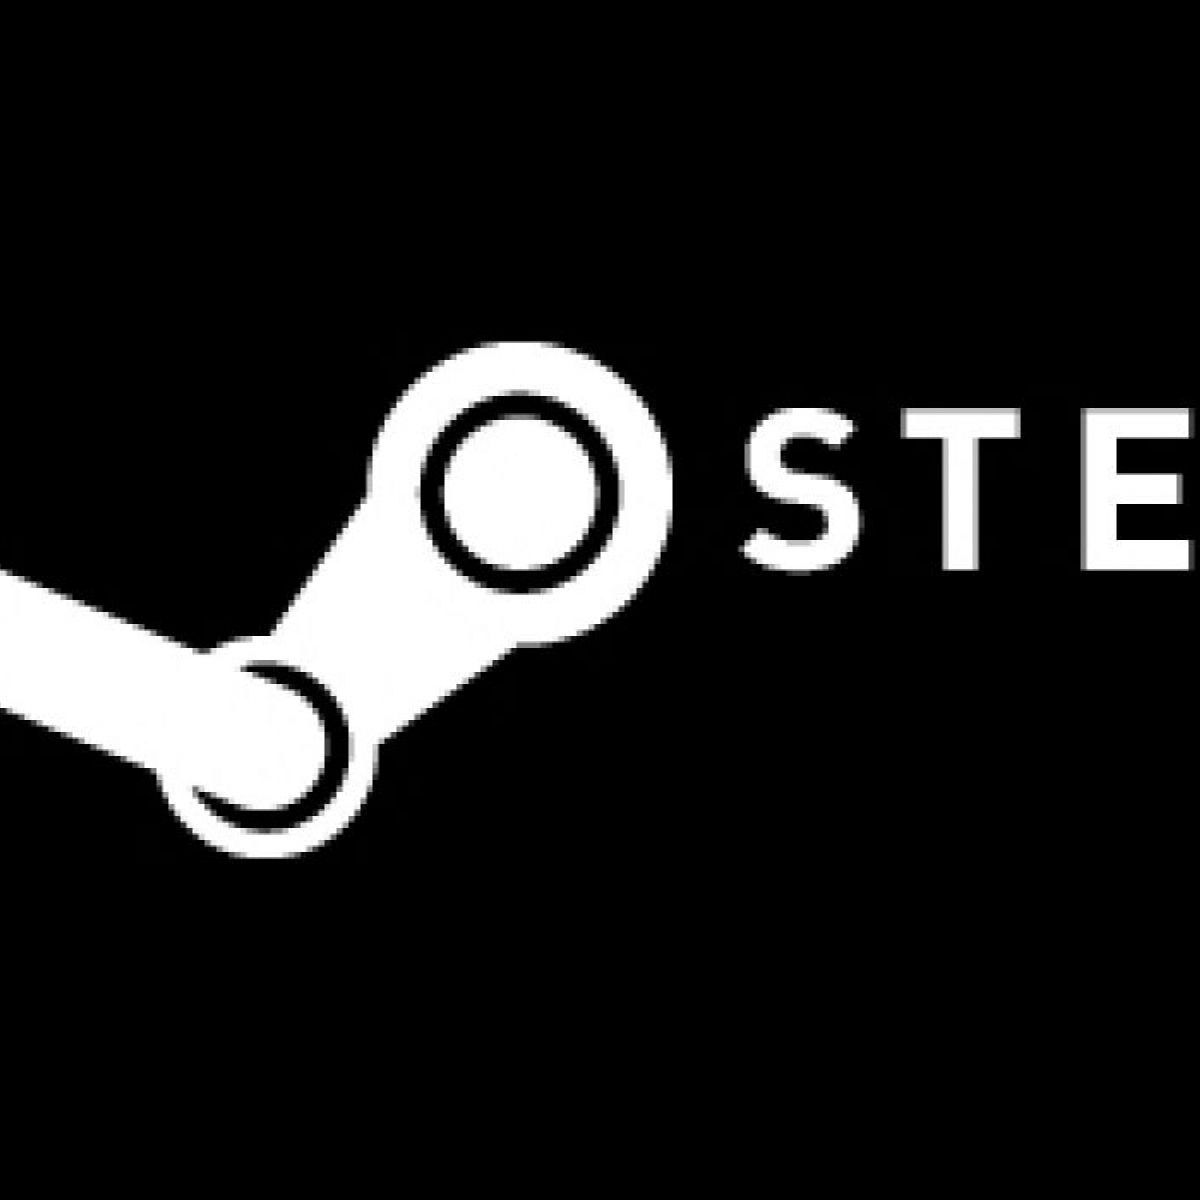 All steam icons gone фото 78